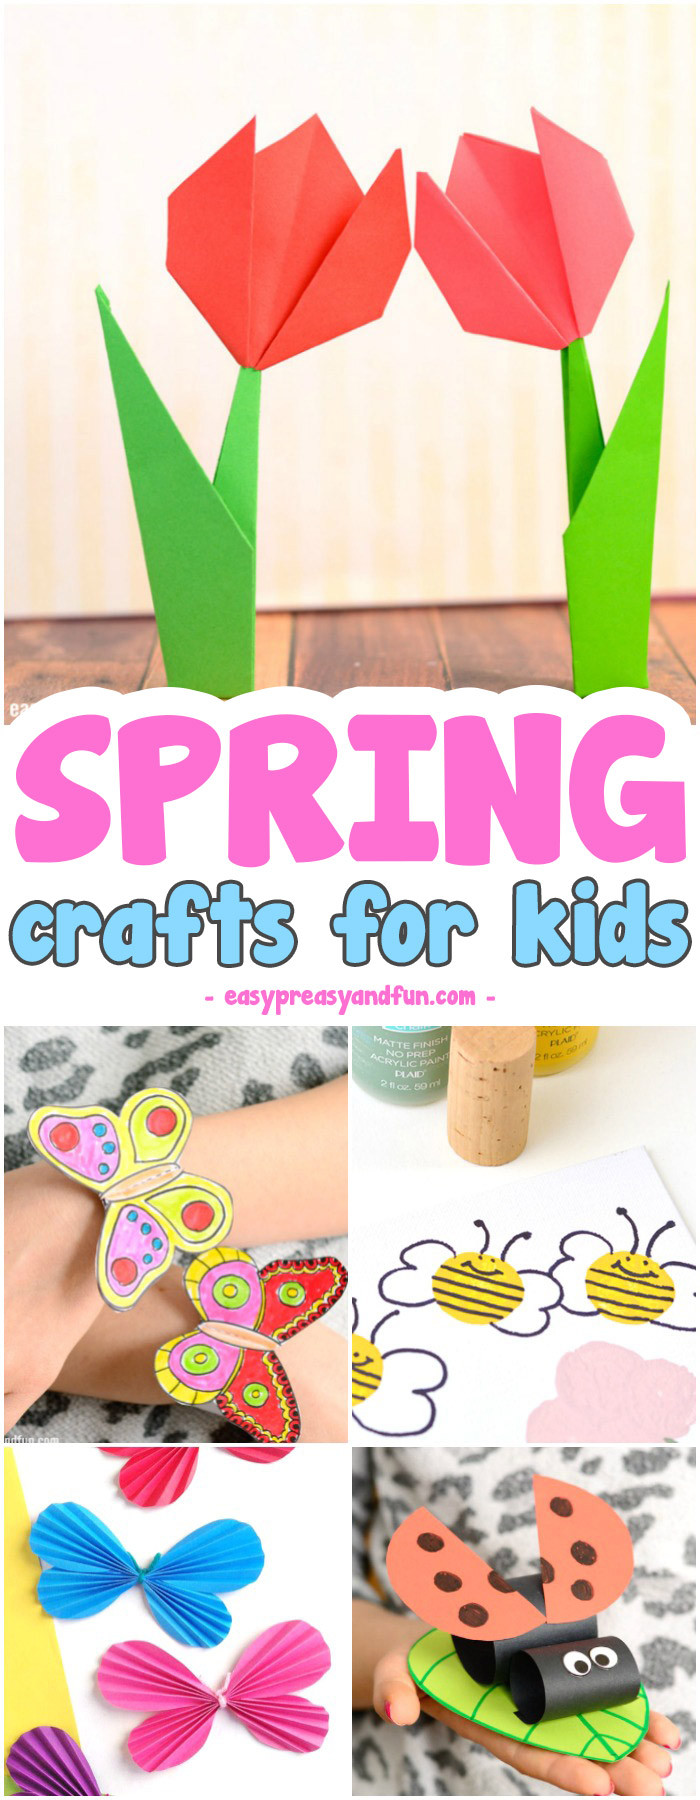 Craft Ideas For Toddlers
 Spring Crafts for Kids Art and Craft Project Ideas for